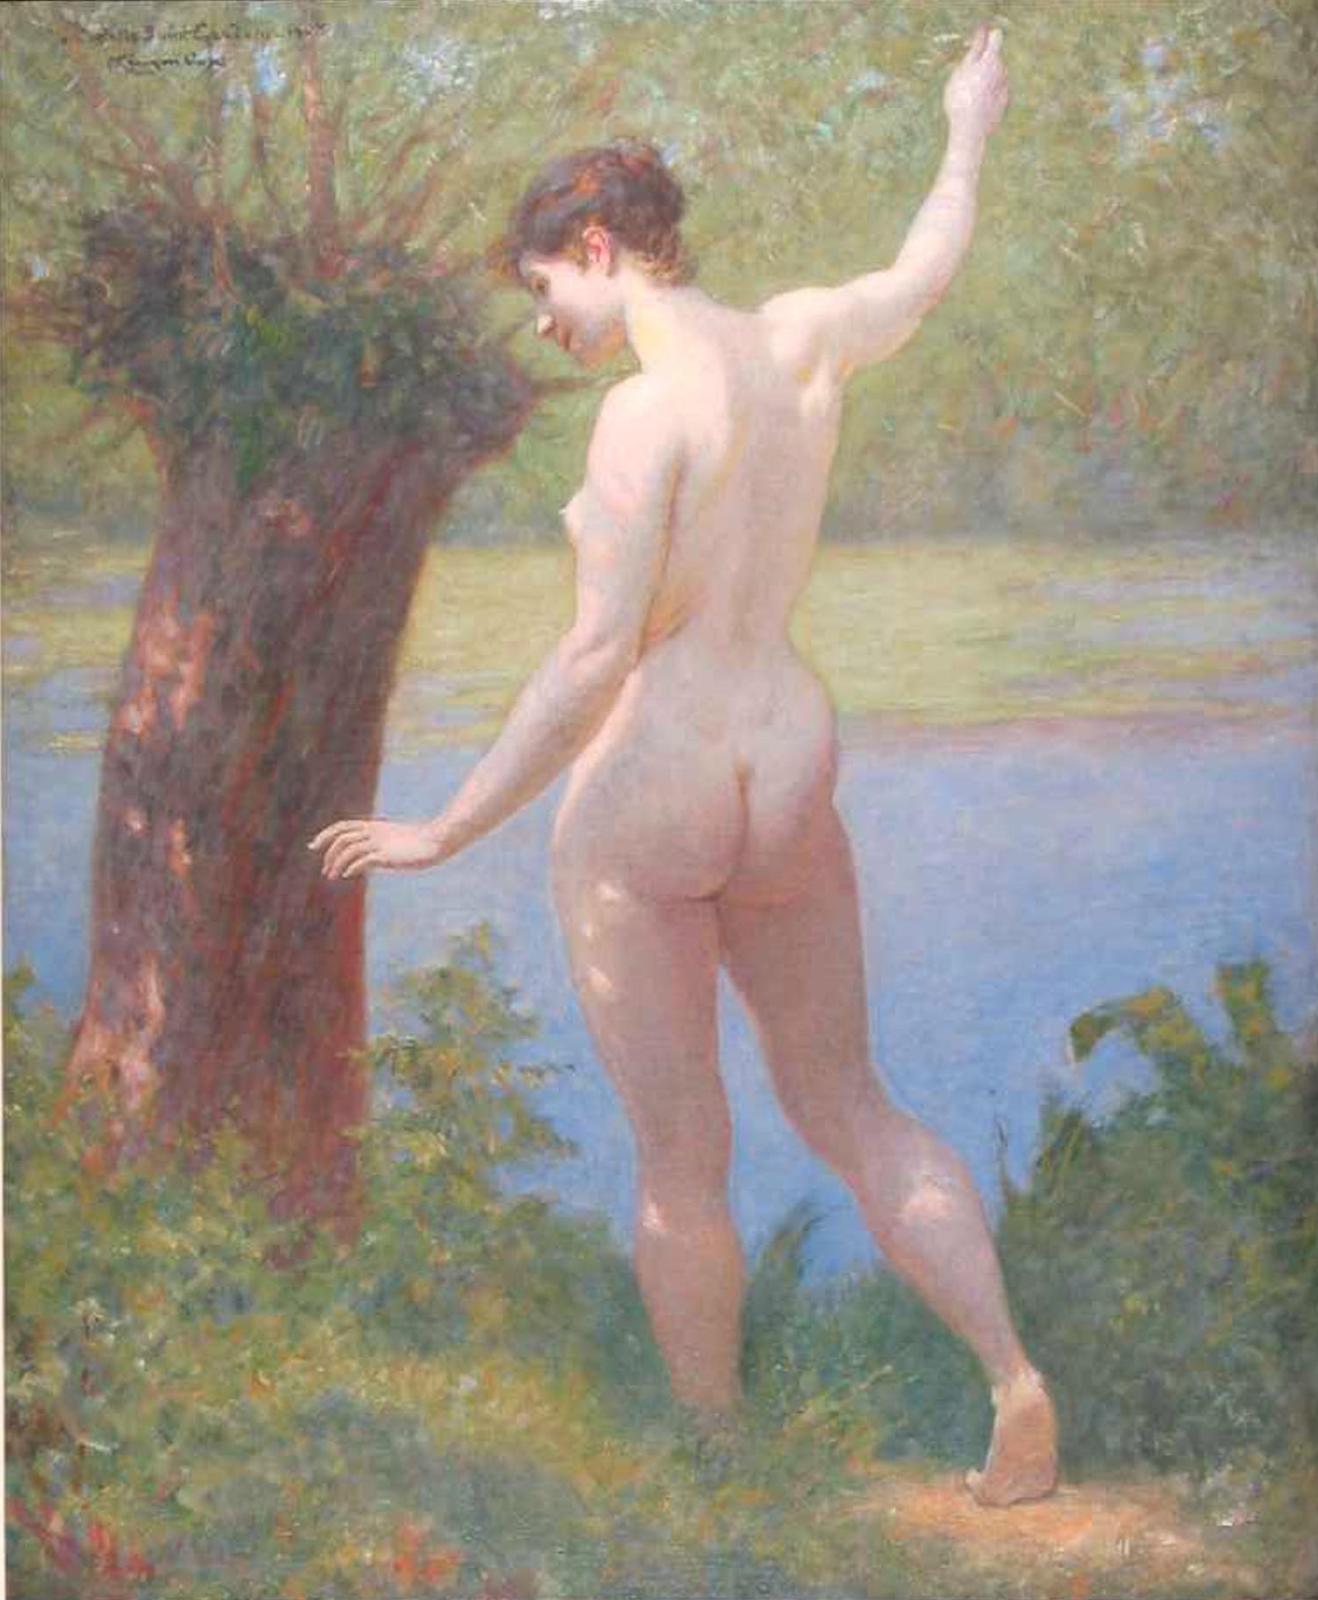 Nude by River's Edge